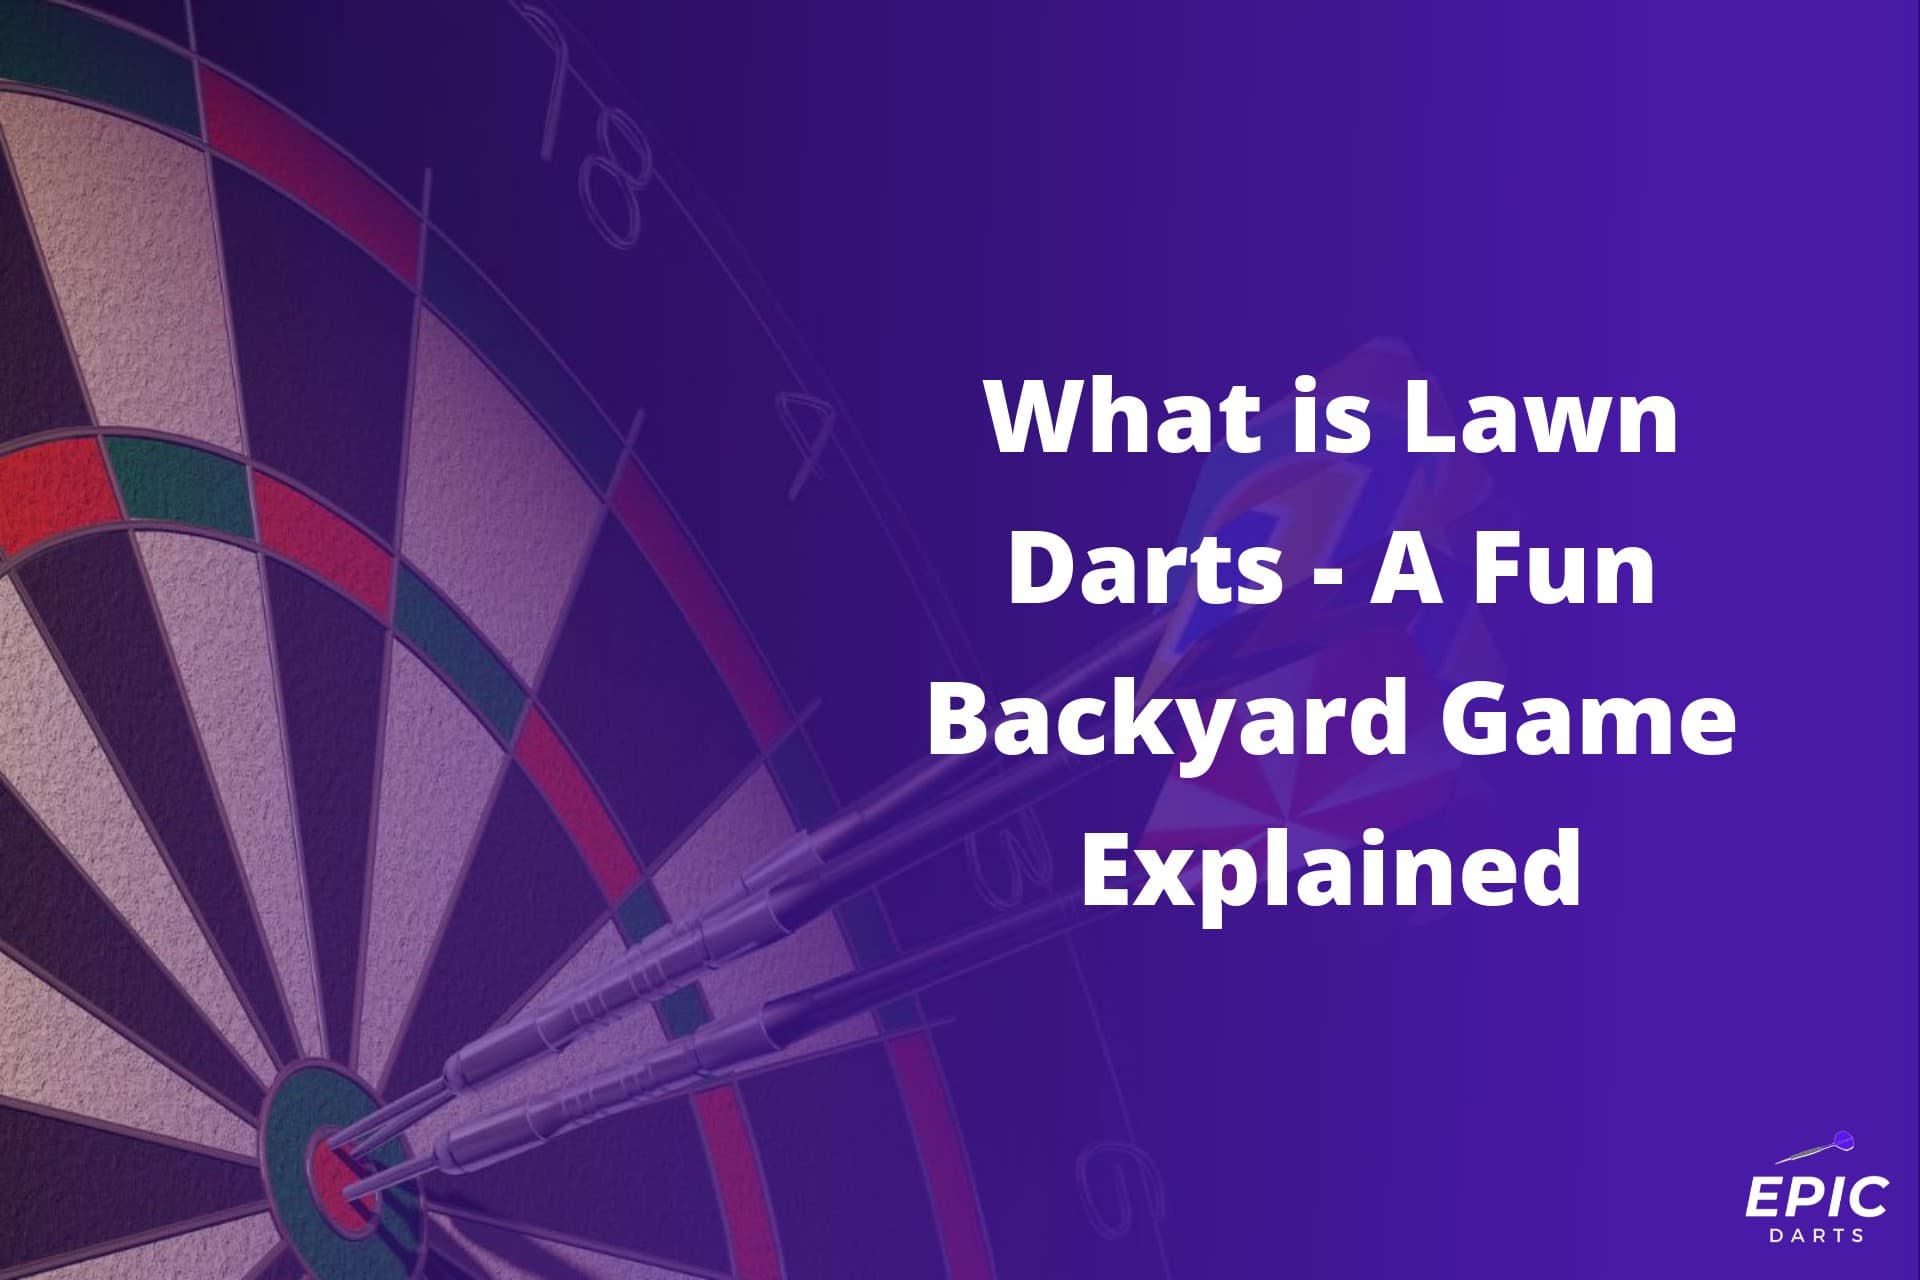 What is Lawn Darts A Fun Backyard Game Explained